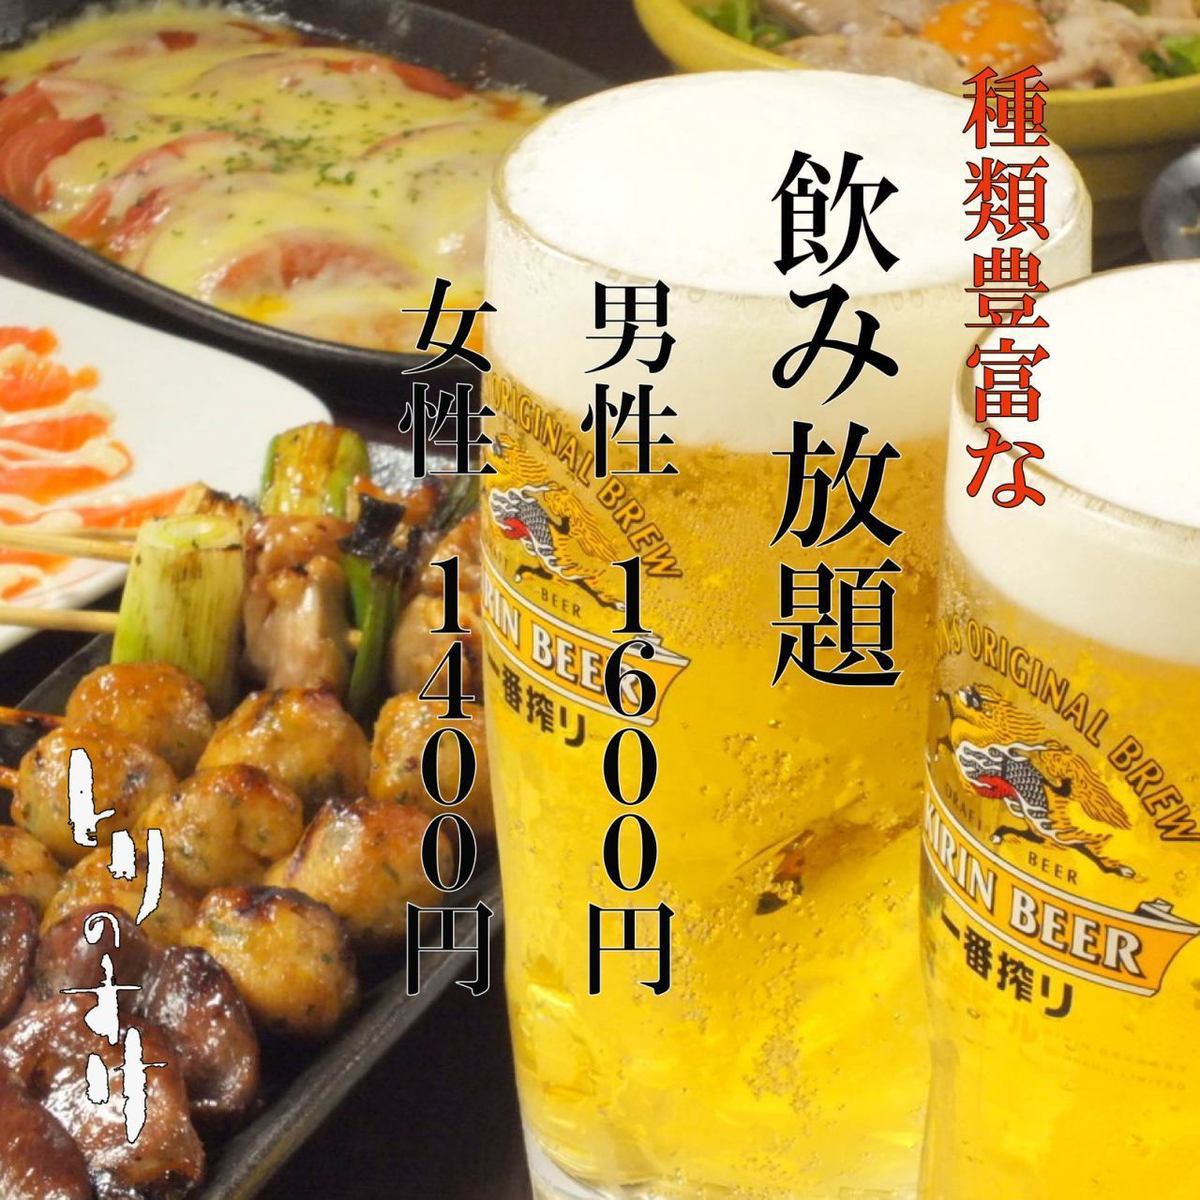 ≪Torinosuke can be sold separately ♪ ≫ Cold beer and yakitori go well ◎